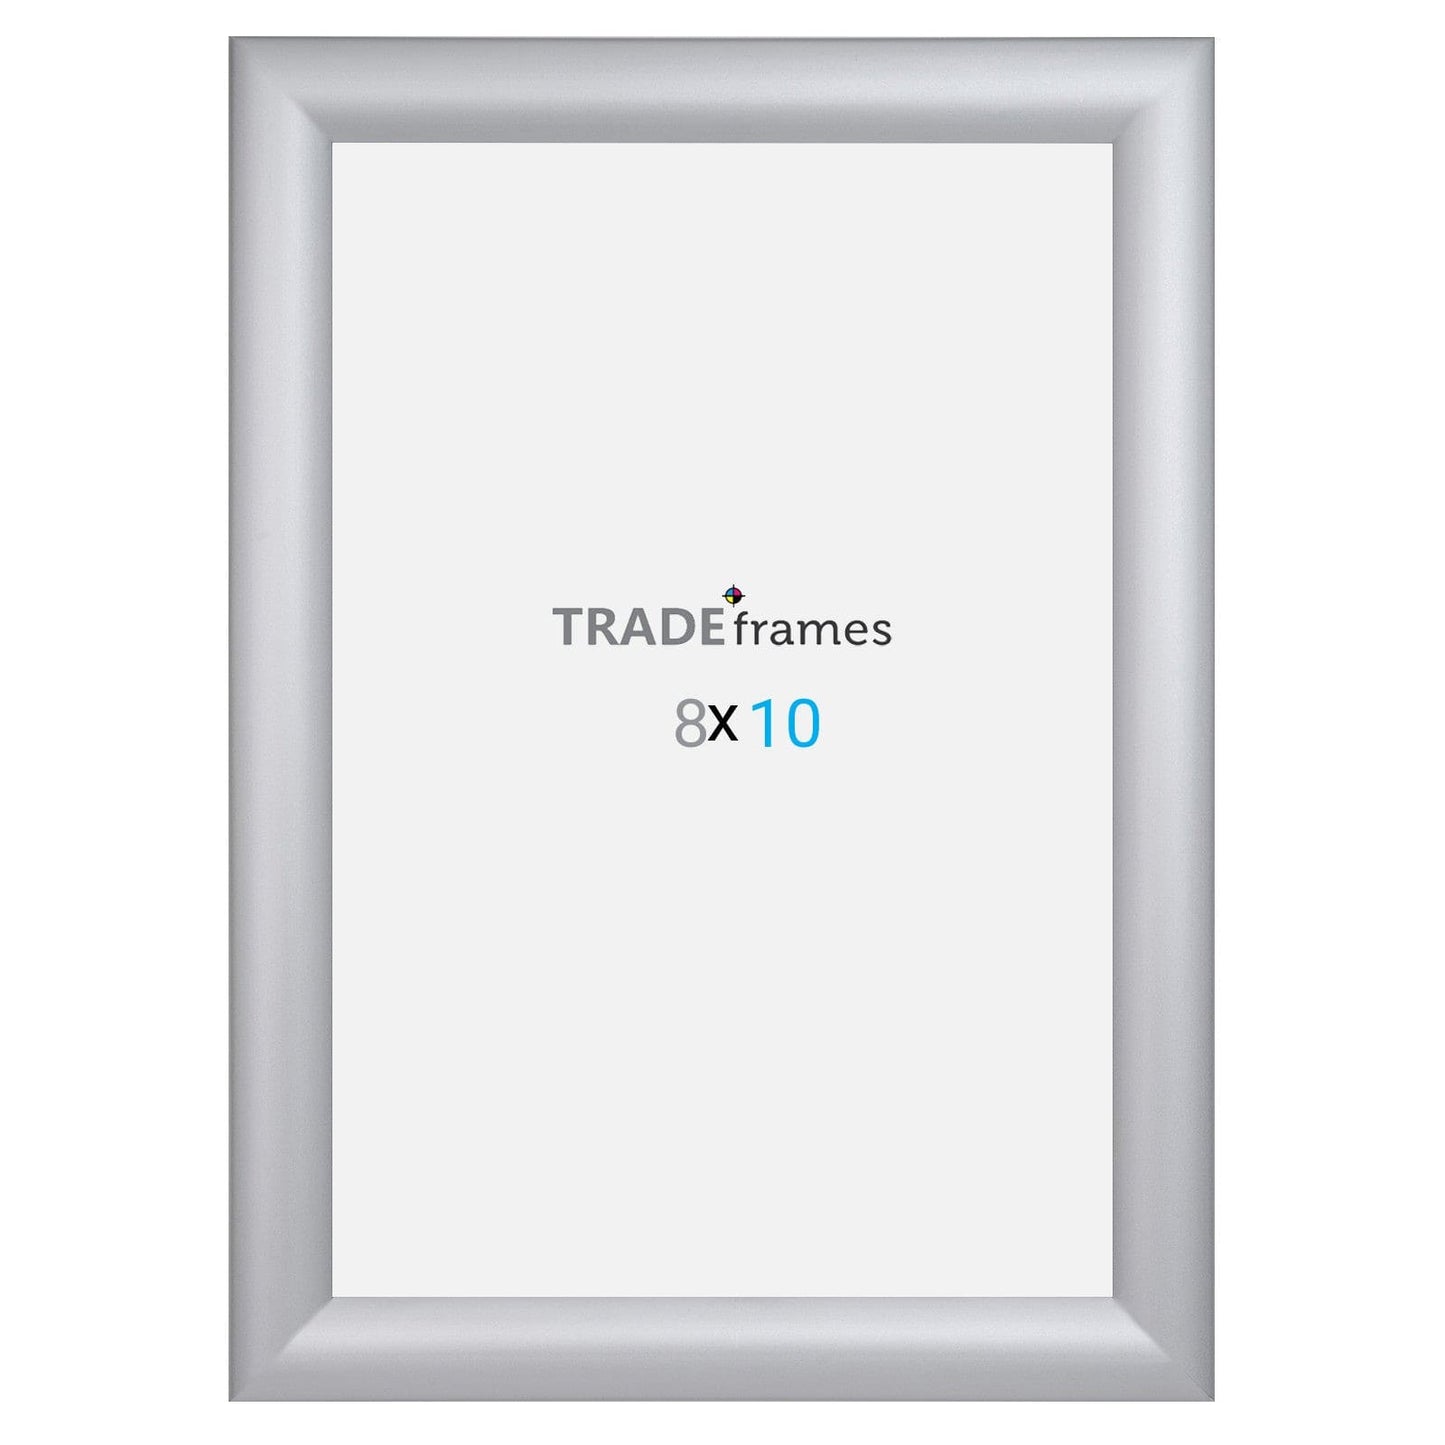 8x10 TRADEframe Silver Snap Frame 8x10 - 1.2 inch profile - Snap Frames Direct